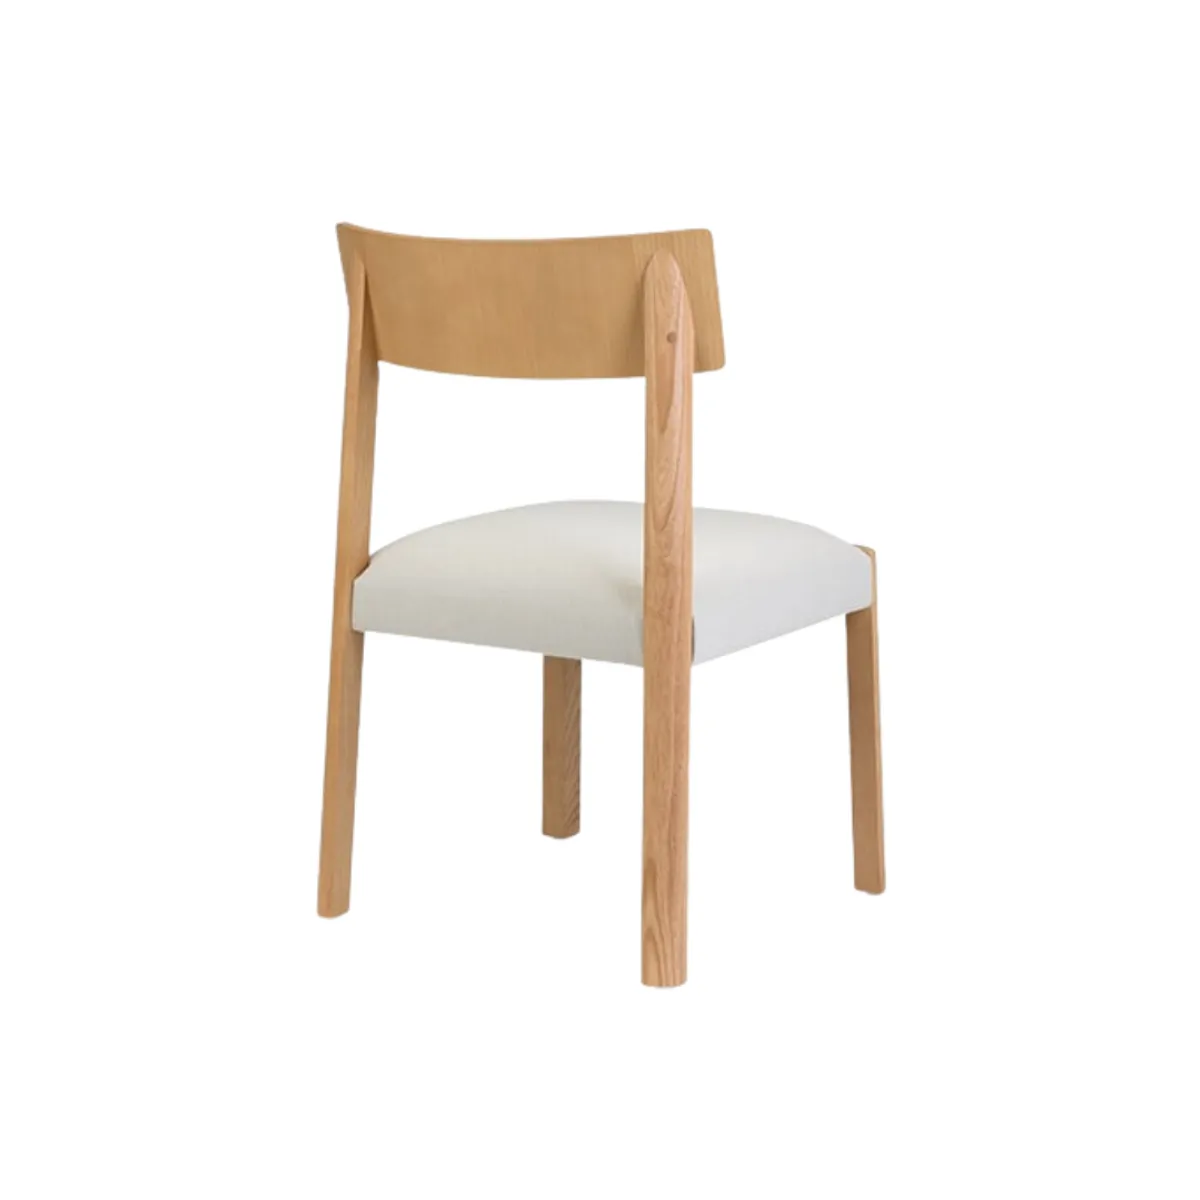 Hatate side chair 2